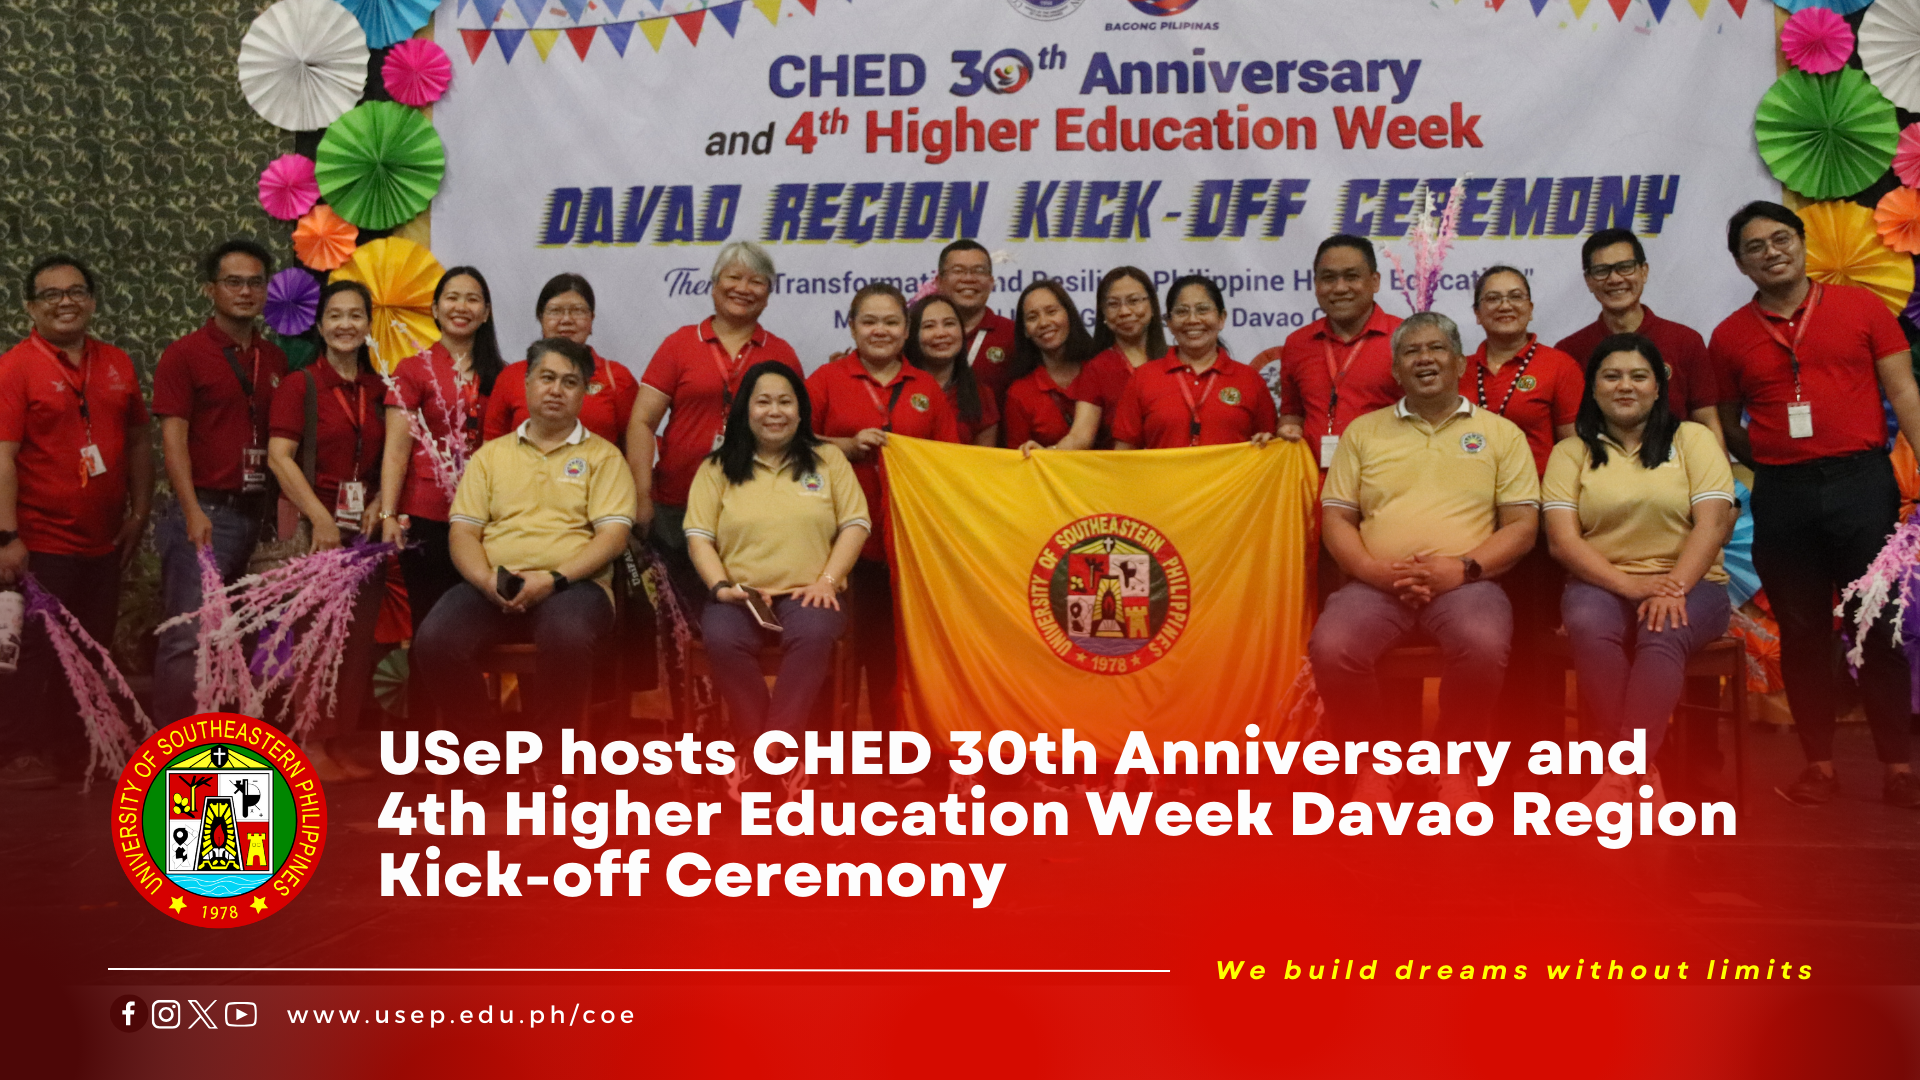 USeP hosts CHED 30th Anniversary and 4th Higher Education Week Davao Region Kick-off Ceremony